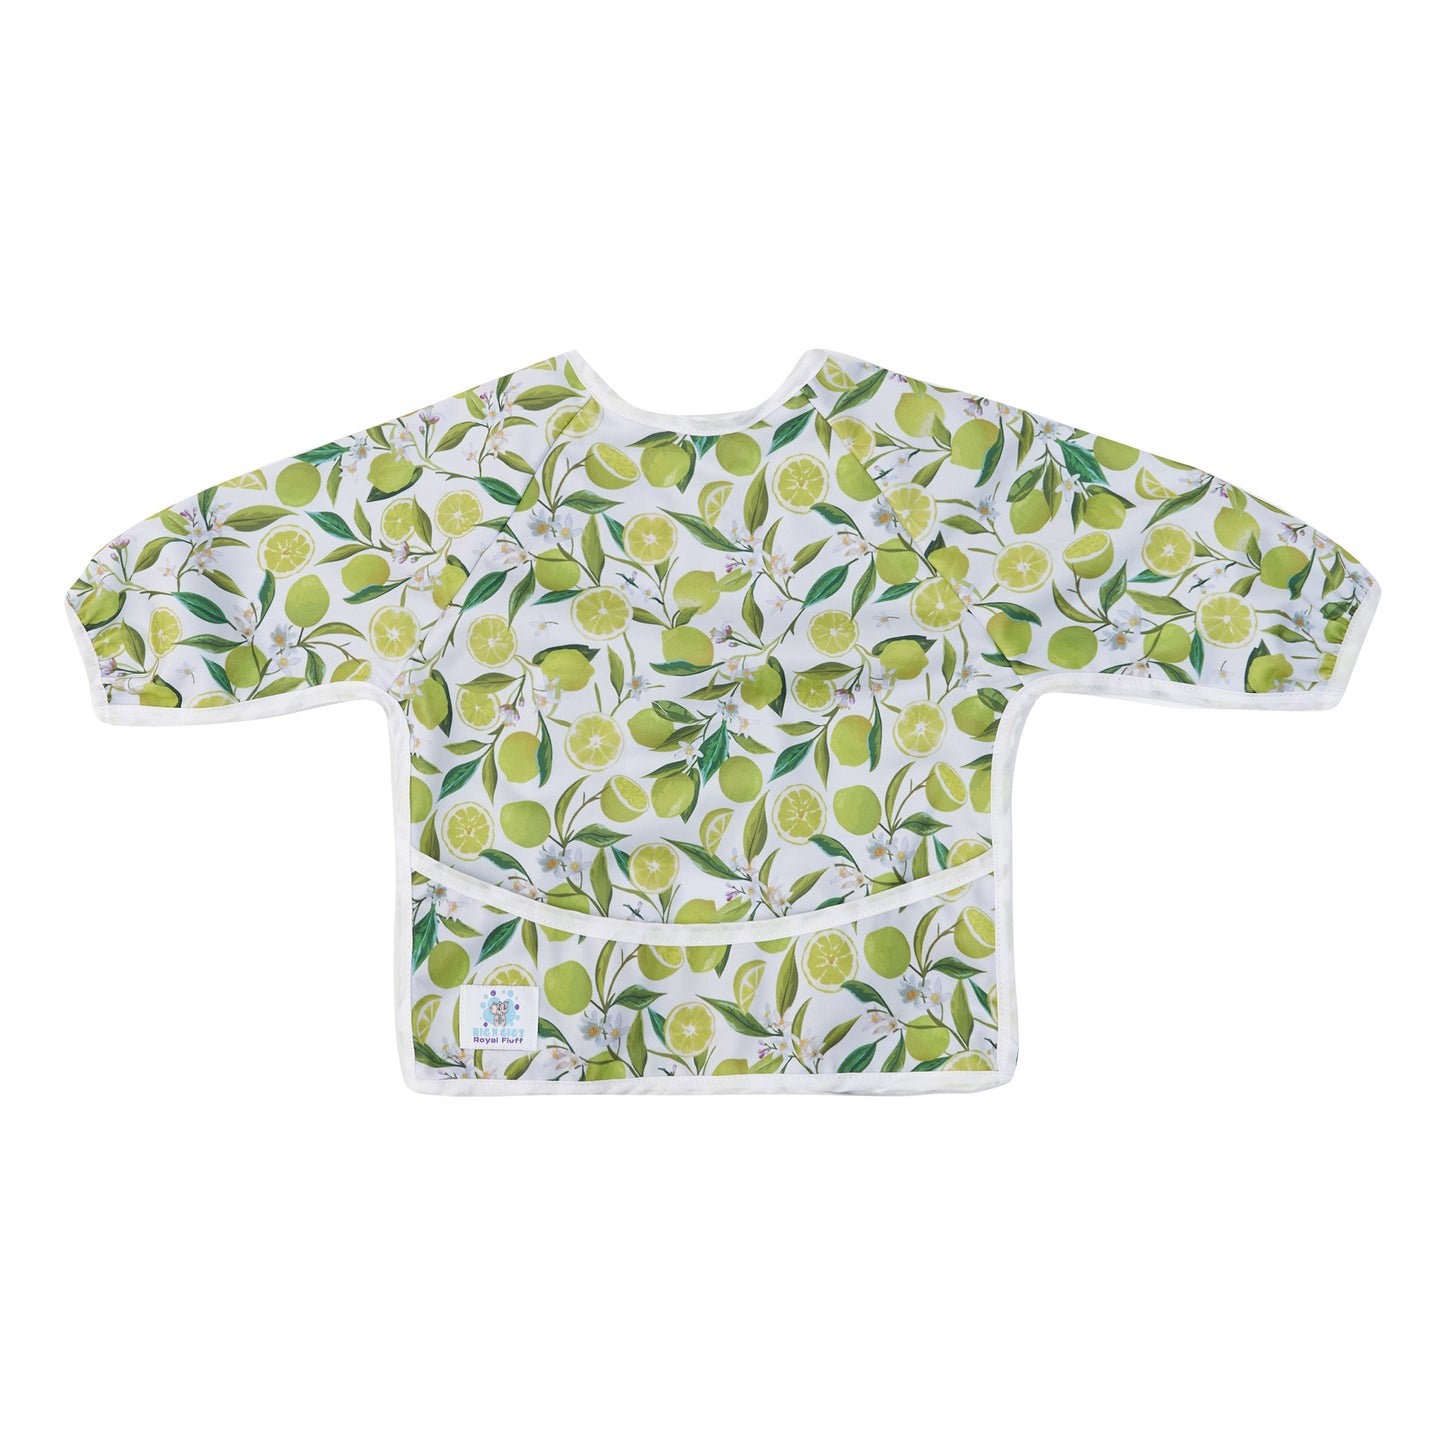 BIBS - LIME IN THE COCONUT -  SPRING RELEASE